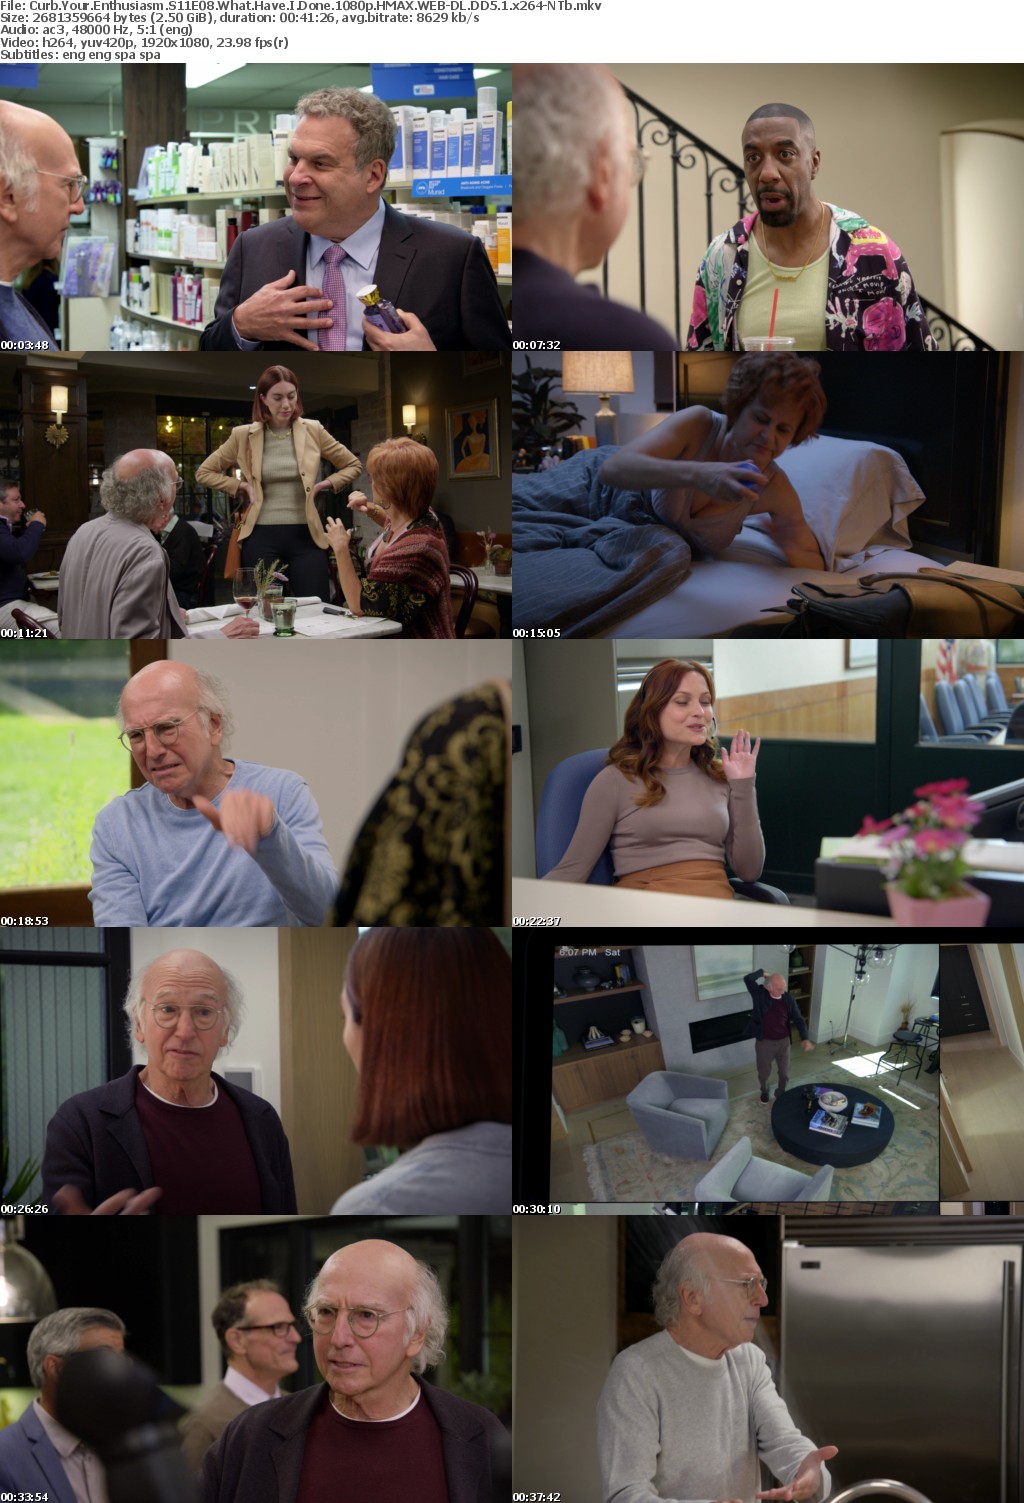 Curb Your Enthusiasm S11E08 What Have I Done 1080p HMAX WEBRip DD5 1 x264-NTb